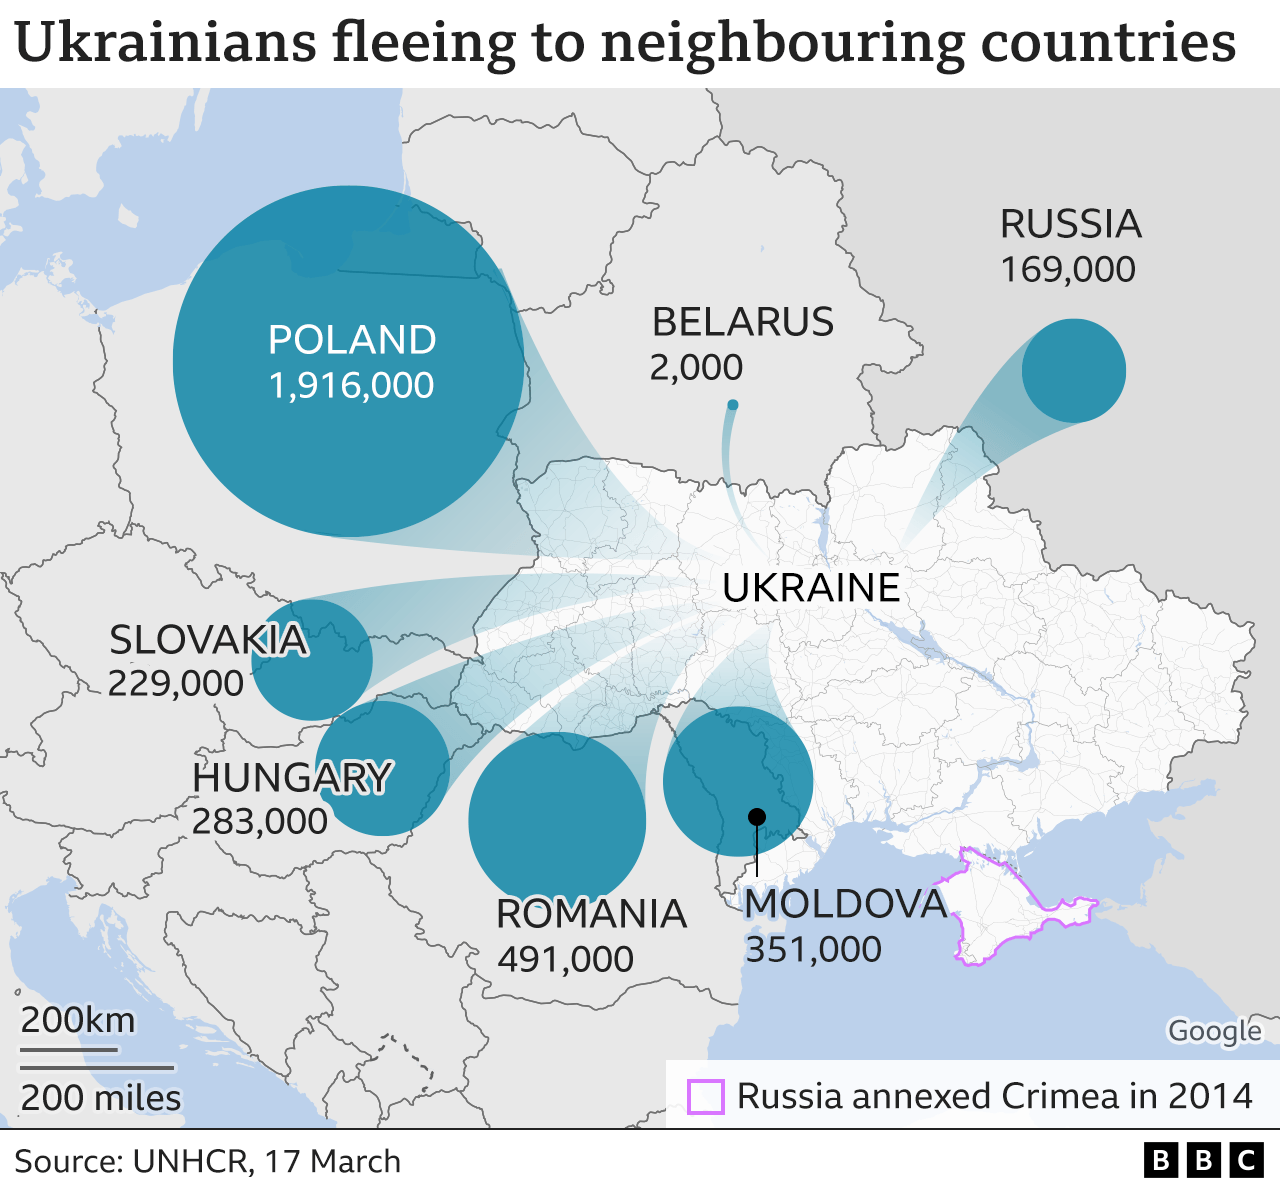 Graphic showing where Ukrainian refugees are going (17 March)